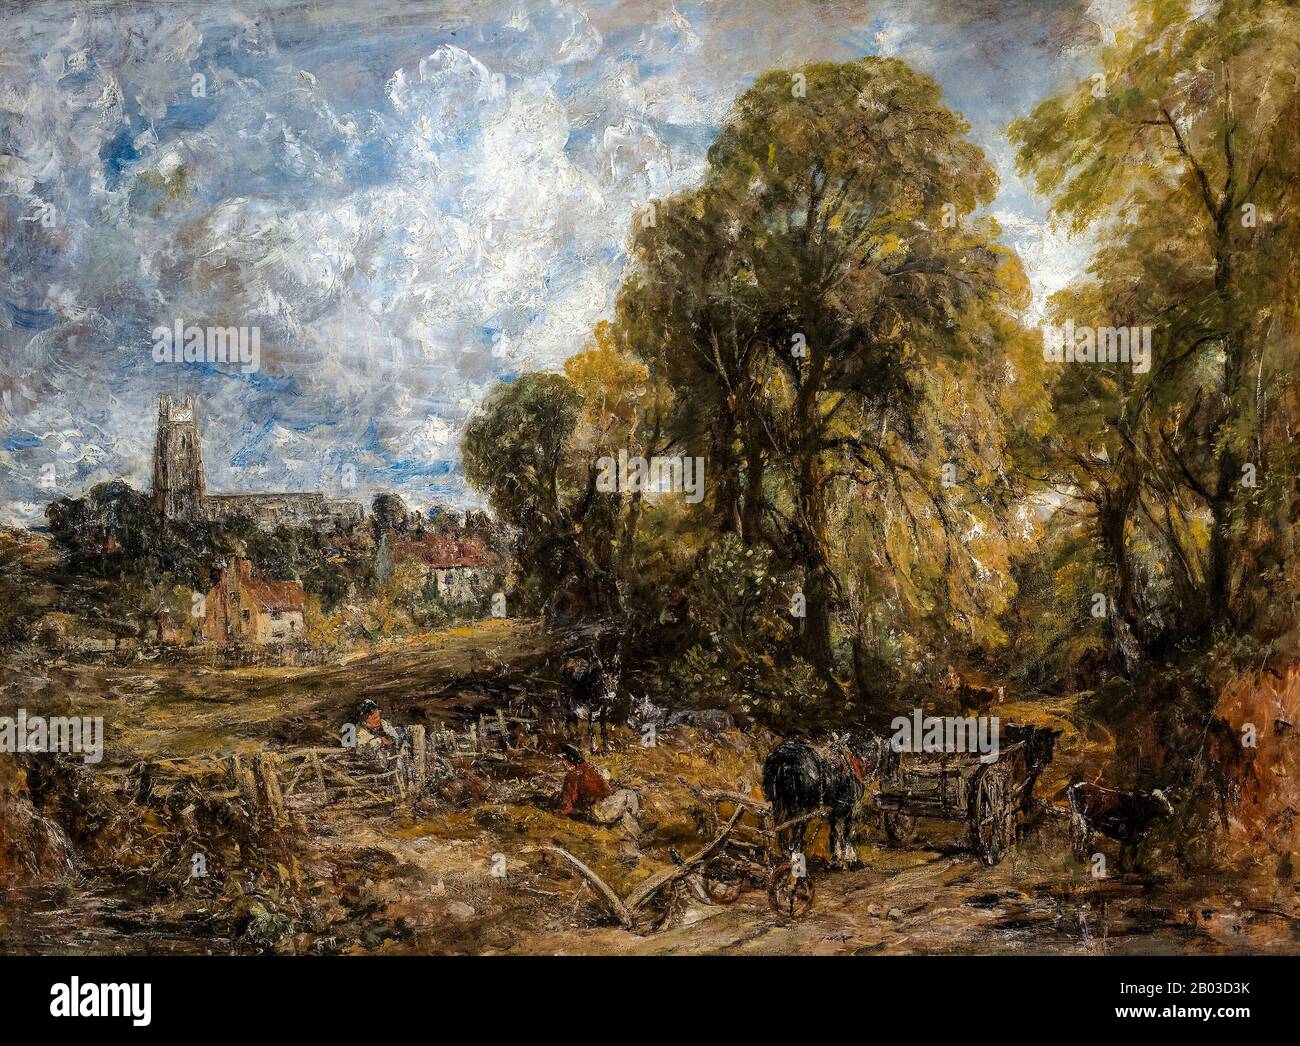 John Constable, Stoke-by-Nayland, landscape painting, 1836 Stock Photo